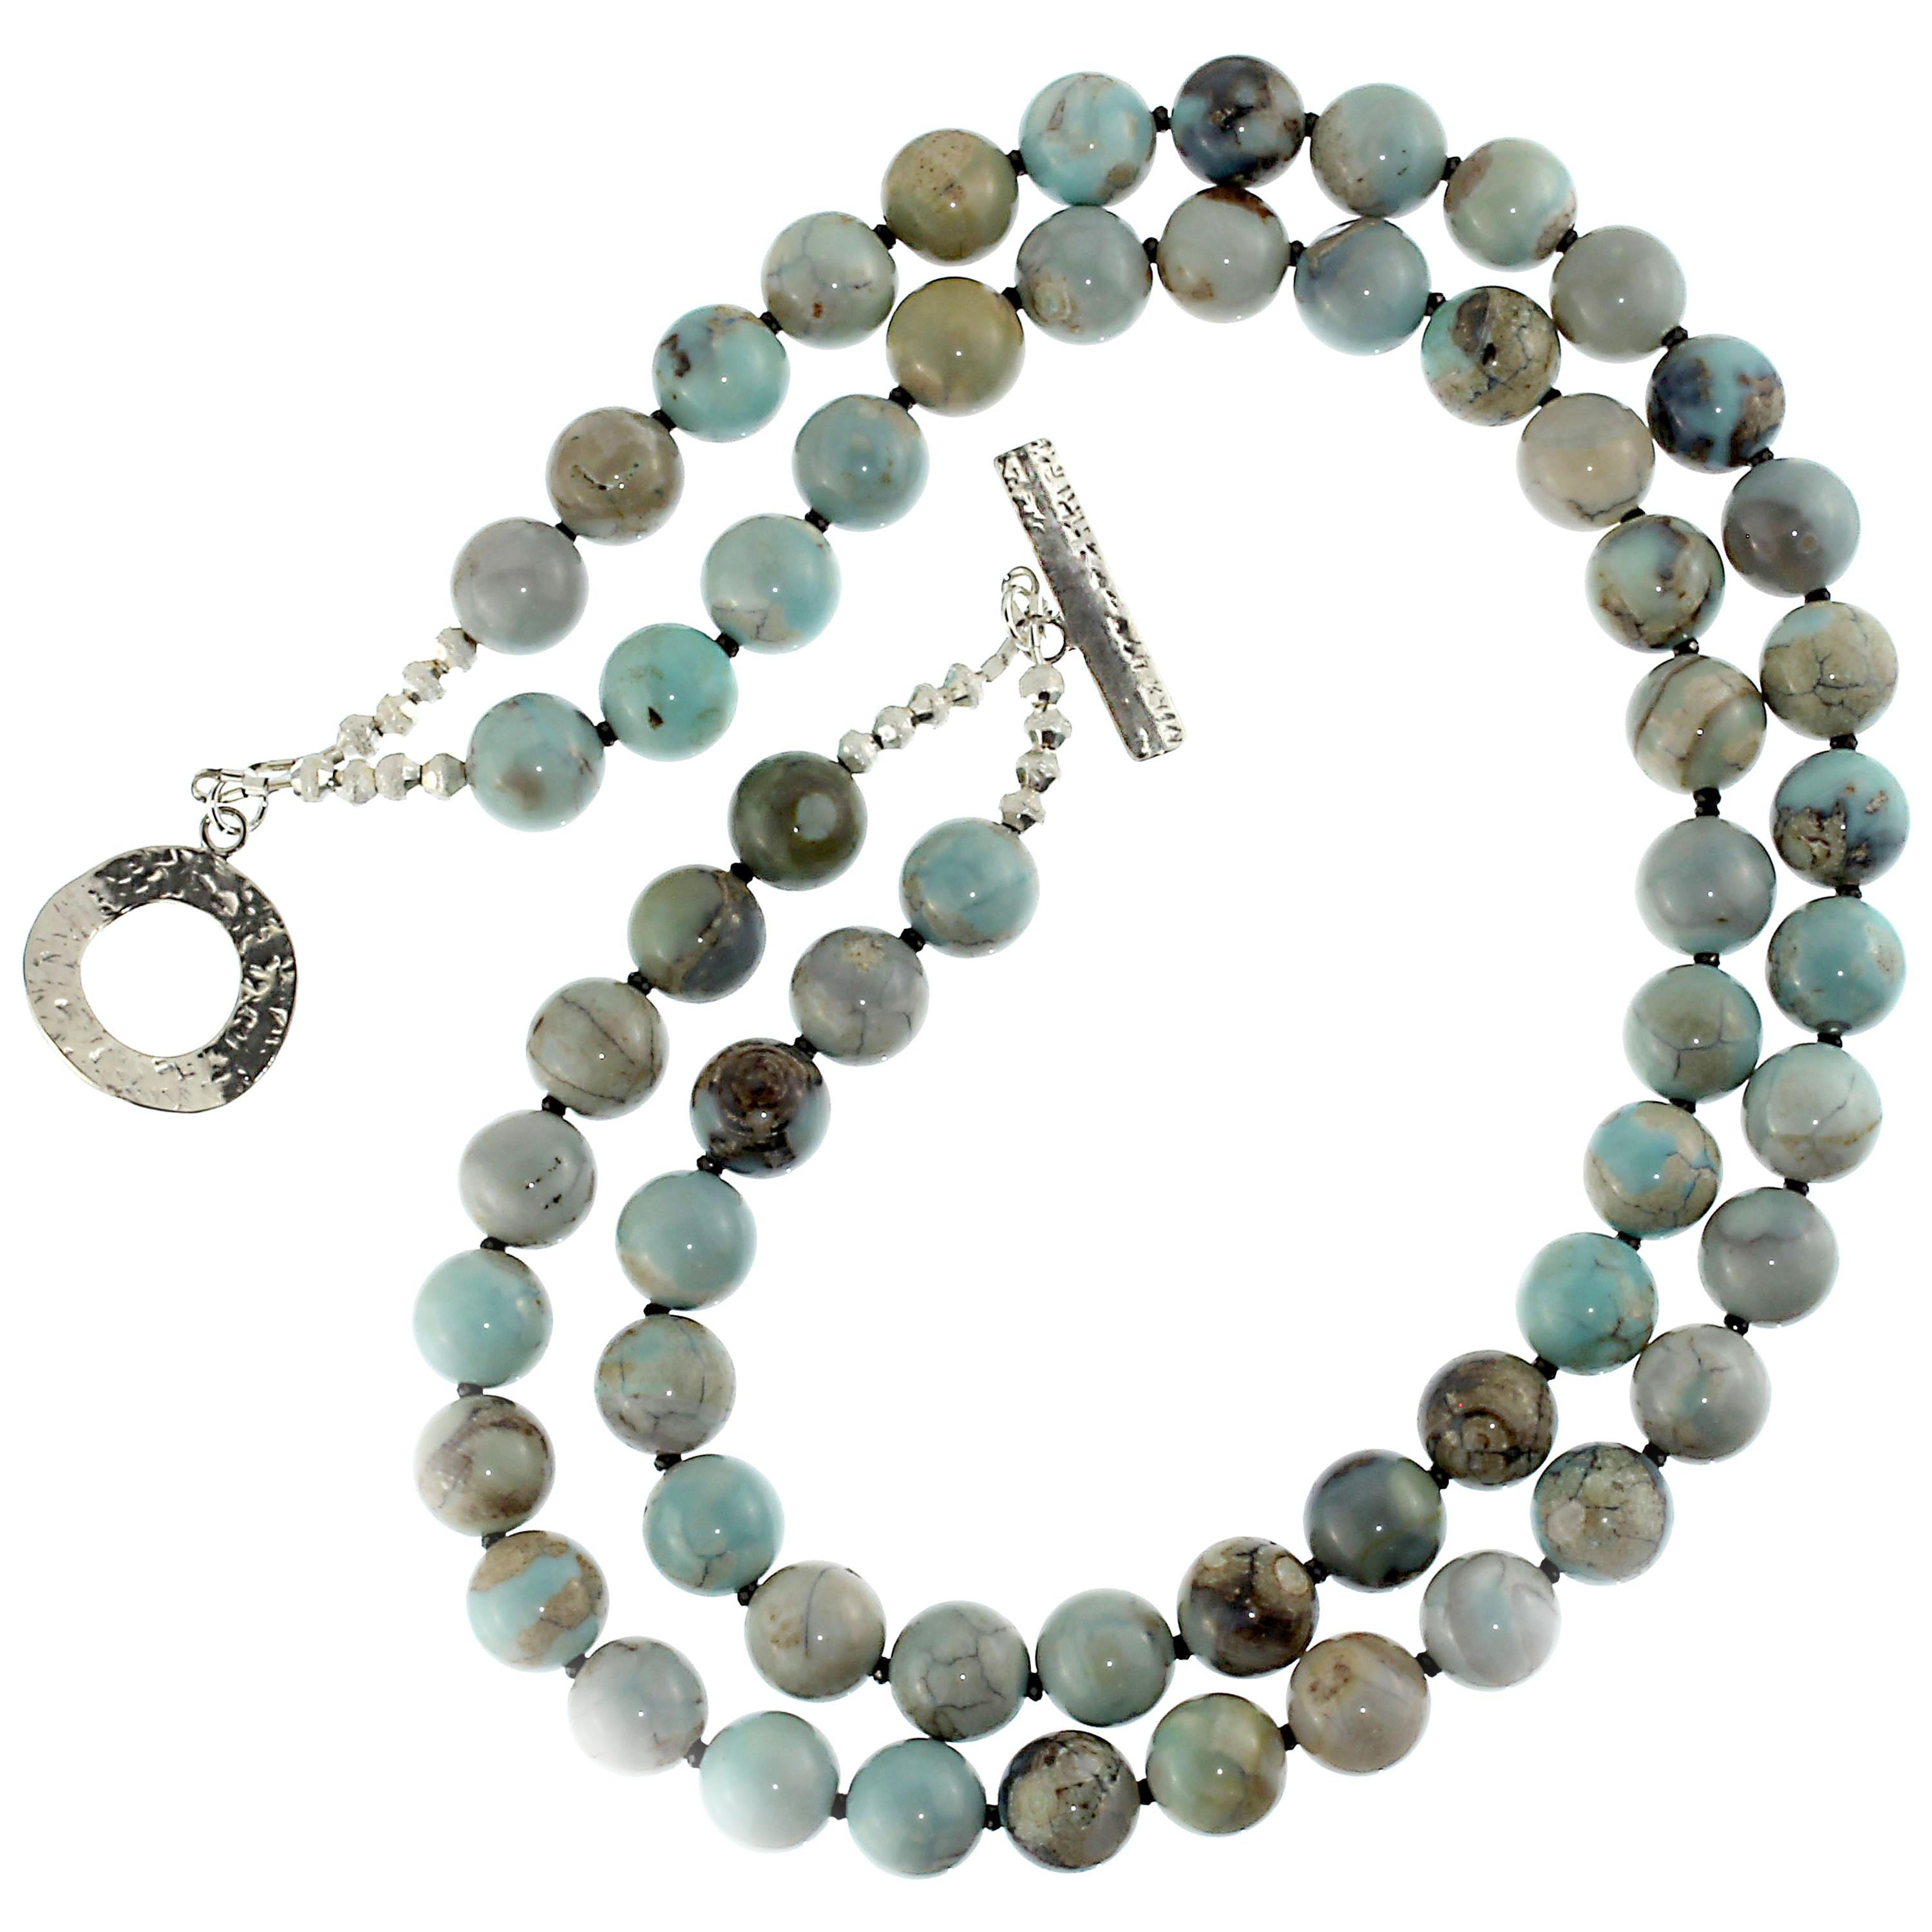 Hand crafted two strand necklace of highly polished Dragon Skin Jasper accented with sparkling black Spinel. This lovely sea blue-green Jasper is mottled with beige and brown. These 12 MM beads are each unique and interesting. This unique necklace